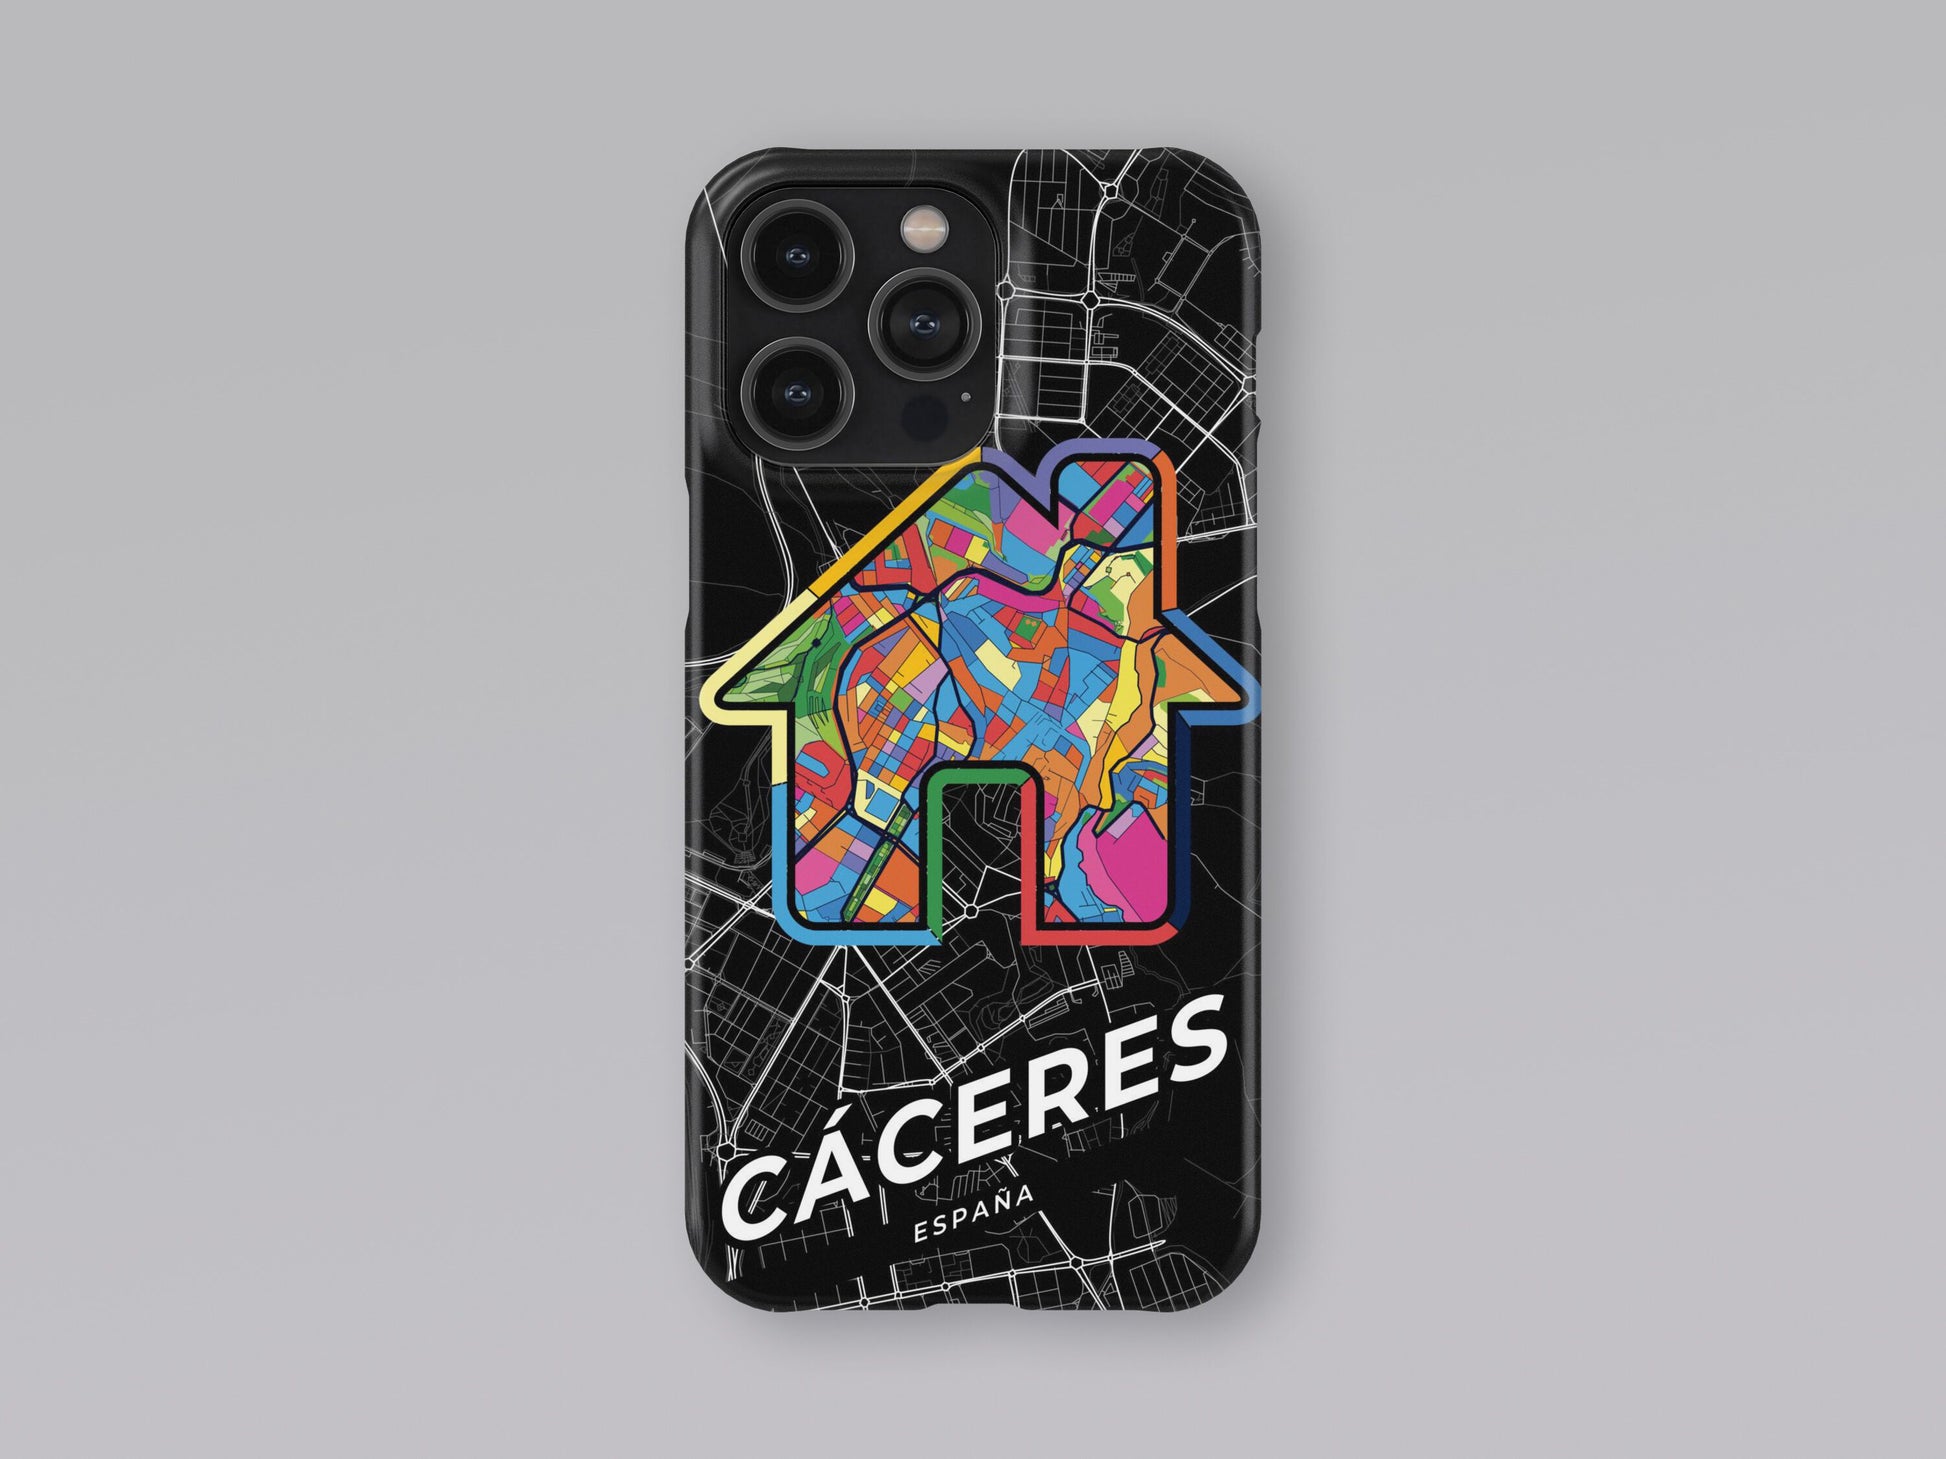 Cáceres Spain slim phone case with colorful icon. Birthday, wedding or housewarming gift. Couple match cases. 3